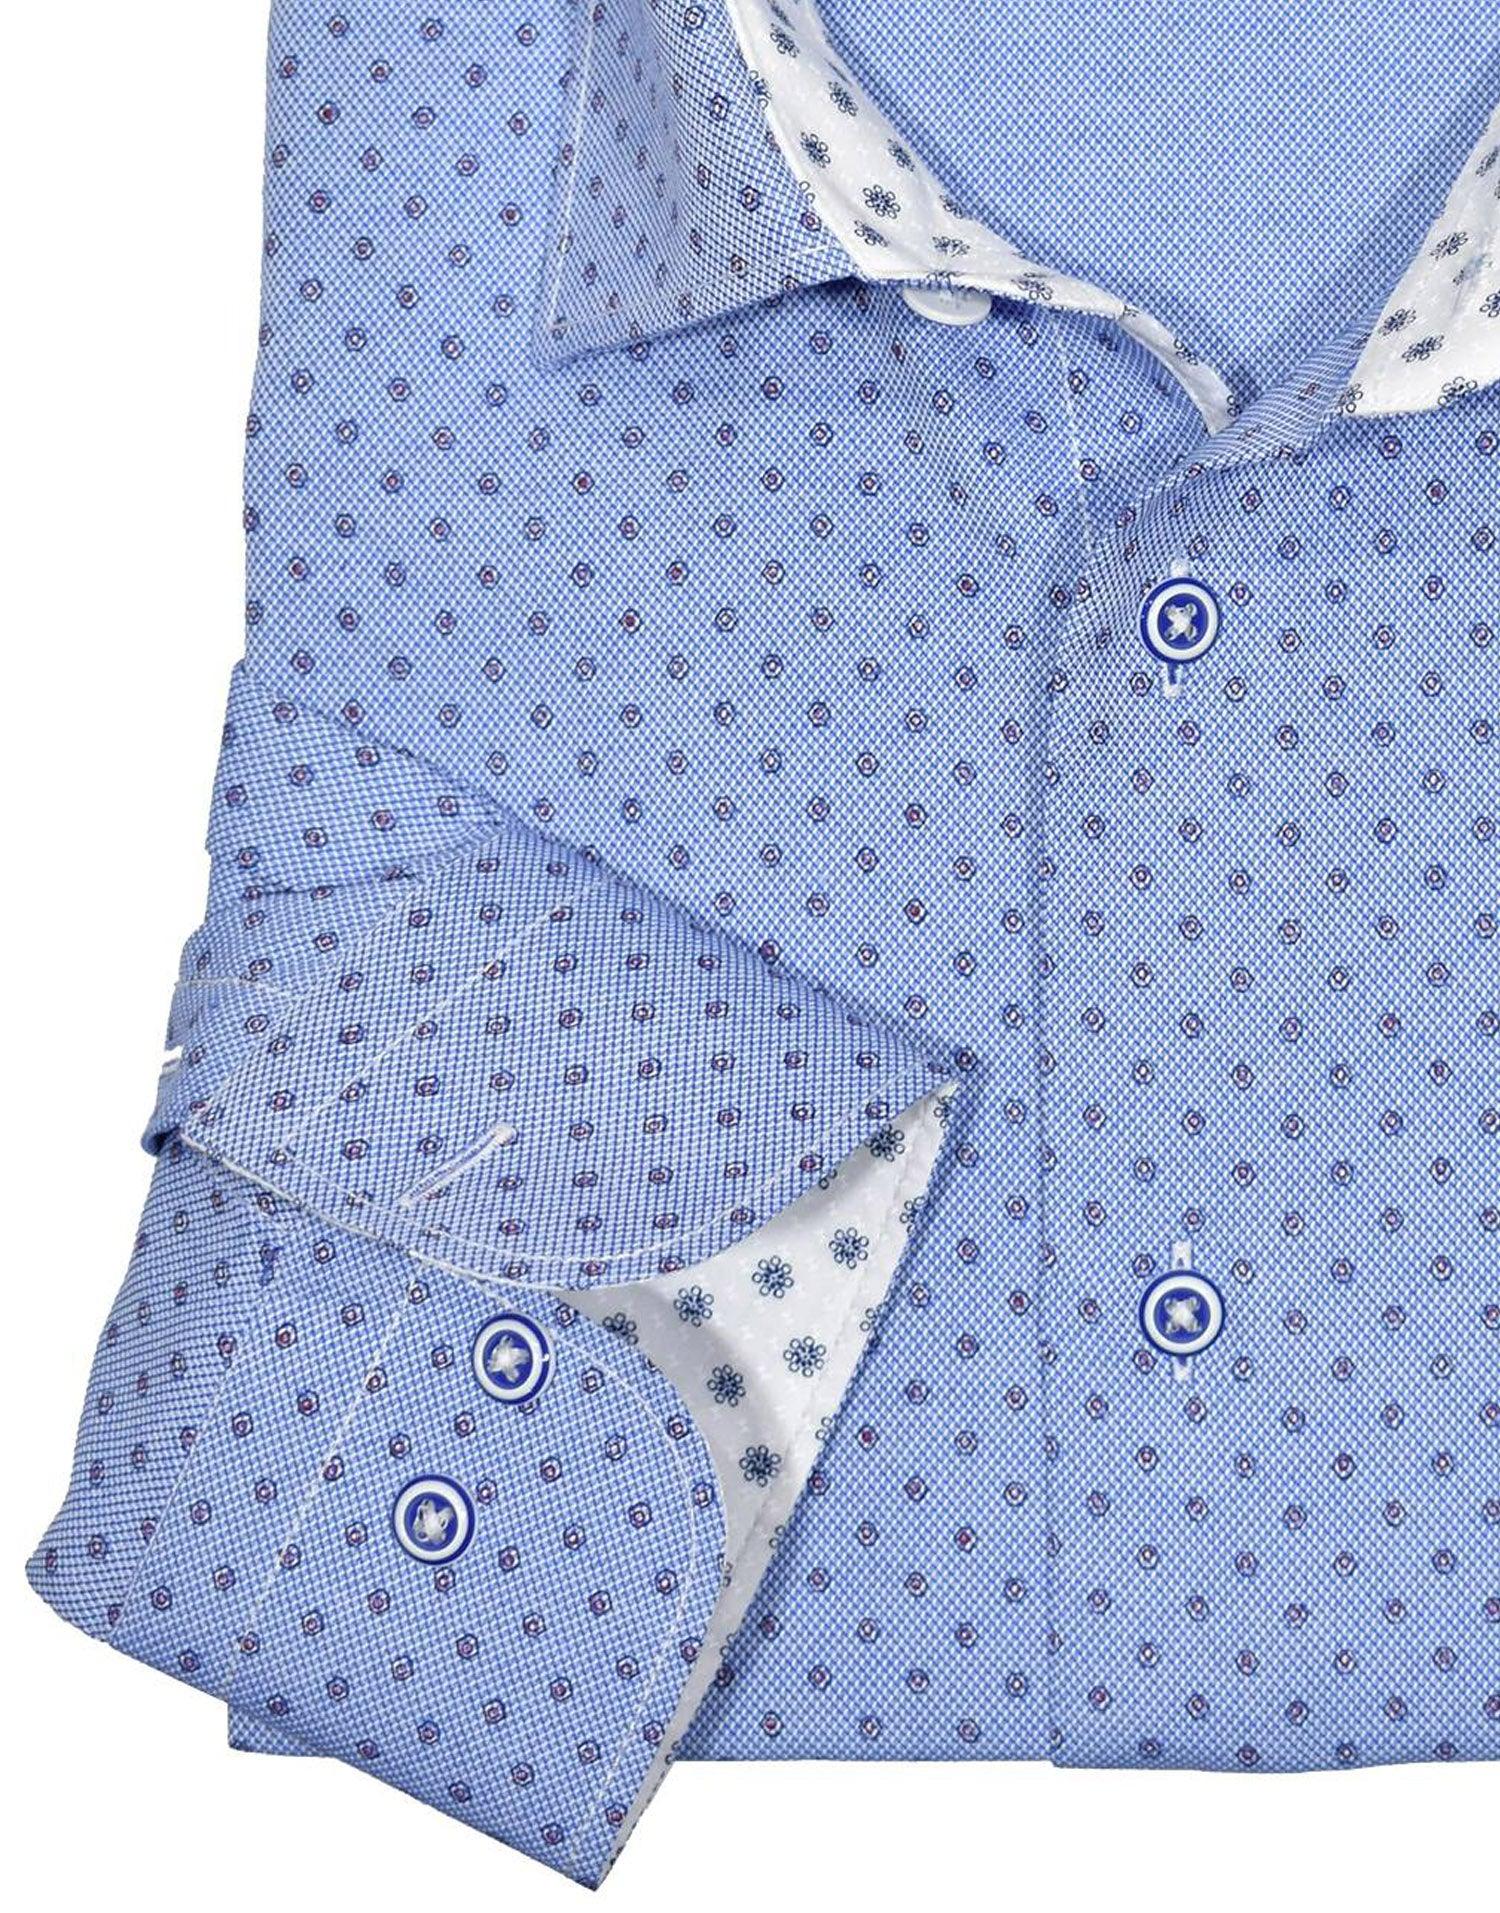 The royal oxford fabric is always rich looking and feels great.  Add in a small medallion with a touch of navy and red for an excellent compliment to any bottoms in blue or navy family, whether pants or jeans.    Extra soft, royal oxford, cotton fabric feels richly exclusive. Custom selected buttons to match the pattern. Accent white stitch detailing. Fashion trim fabric. Medium collar. Classic shaped fit, perfect for a medium build.